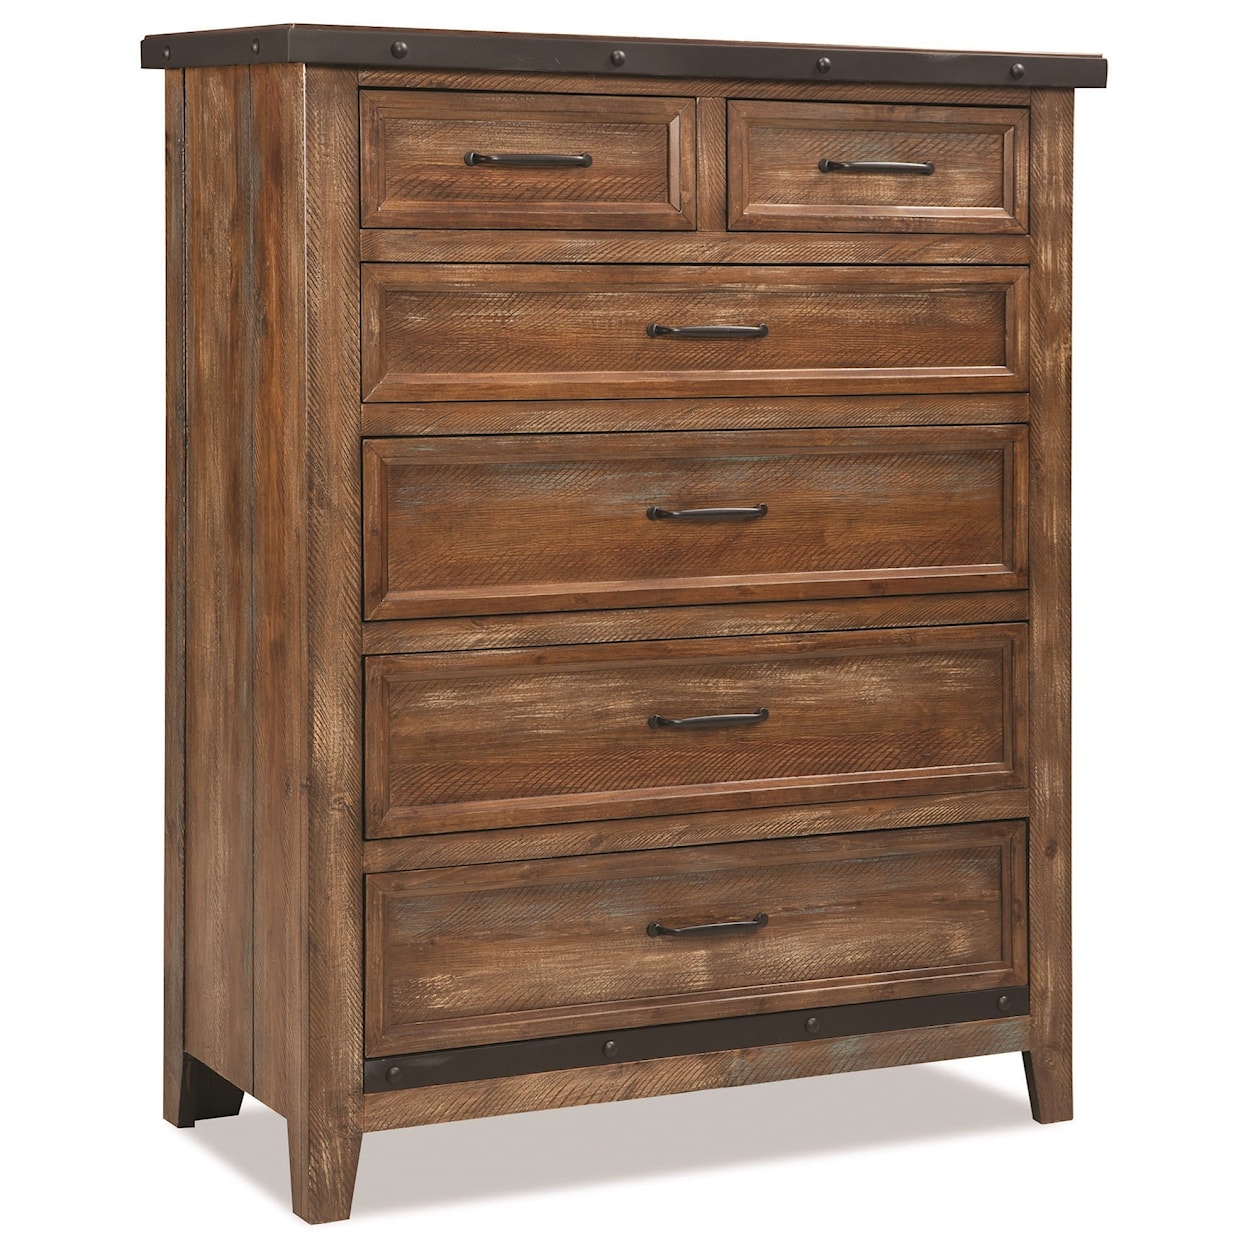 Intercon Taos Chest of Drawers